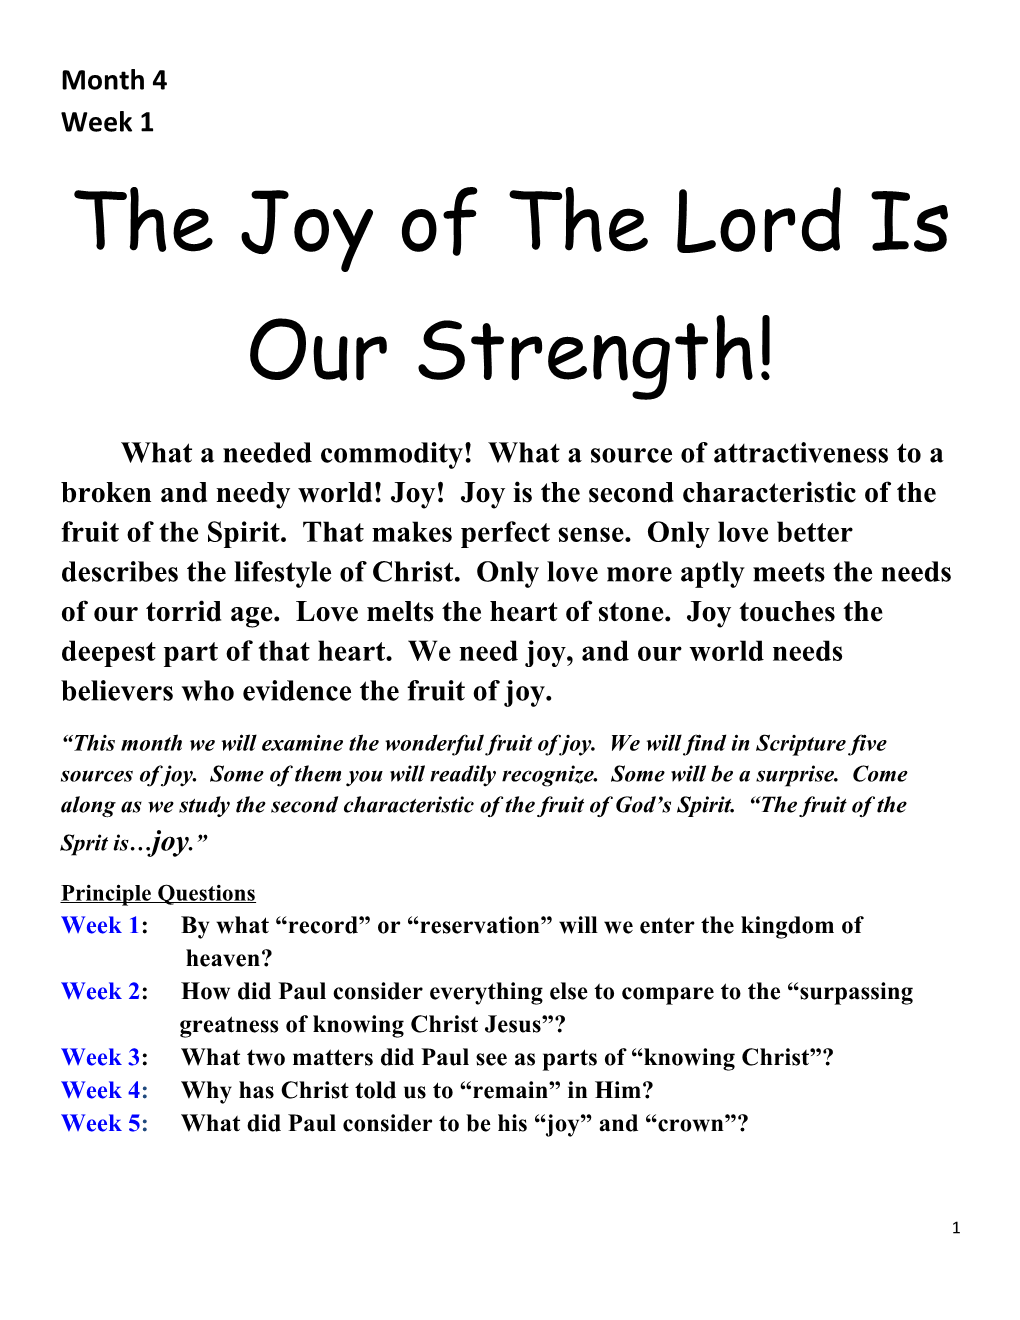 The Joy of the Lord Is Our Strength!